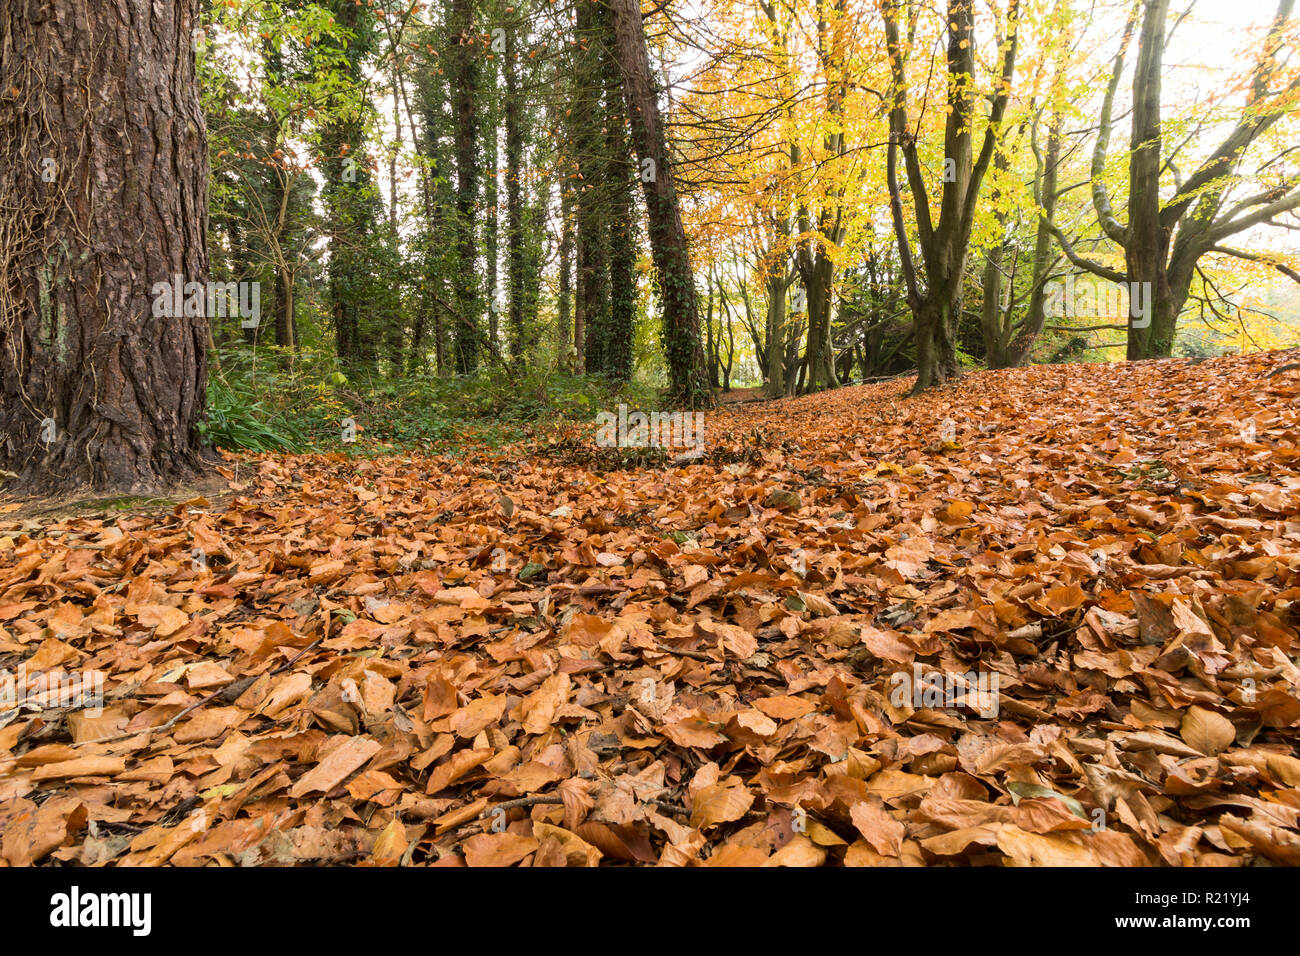 Fallen leaves carpet the forest floor in Autumn Stock Photo